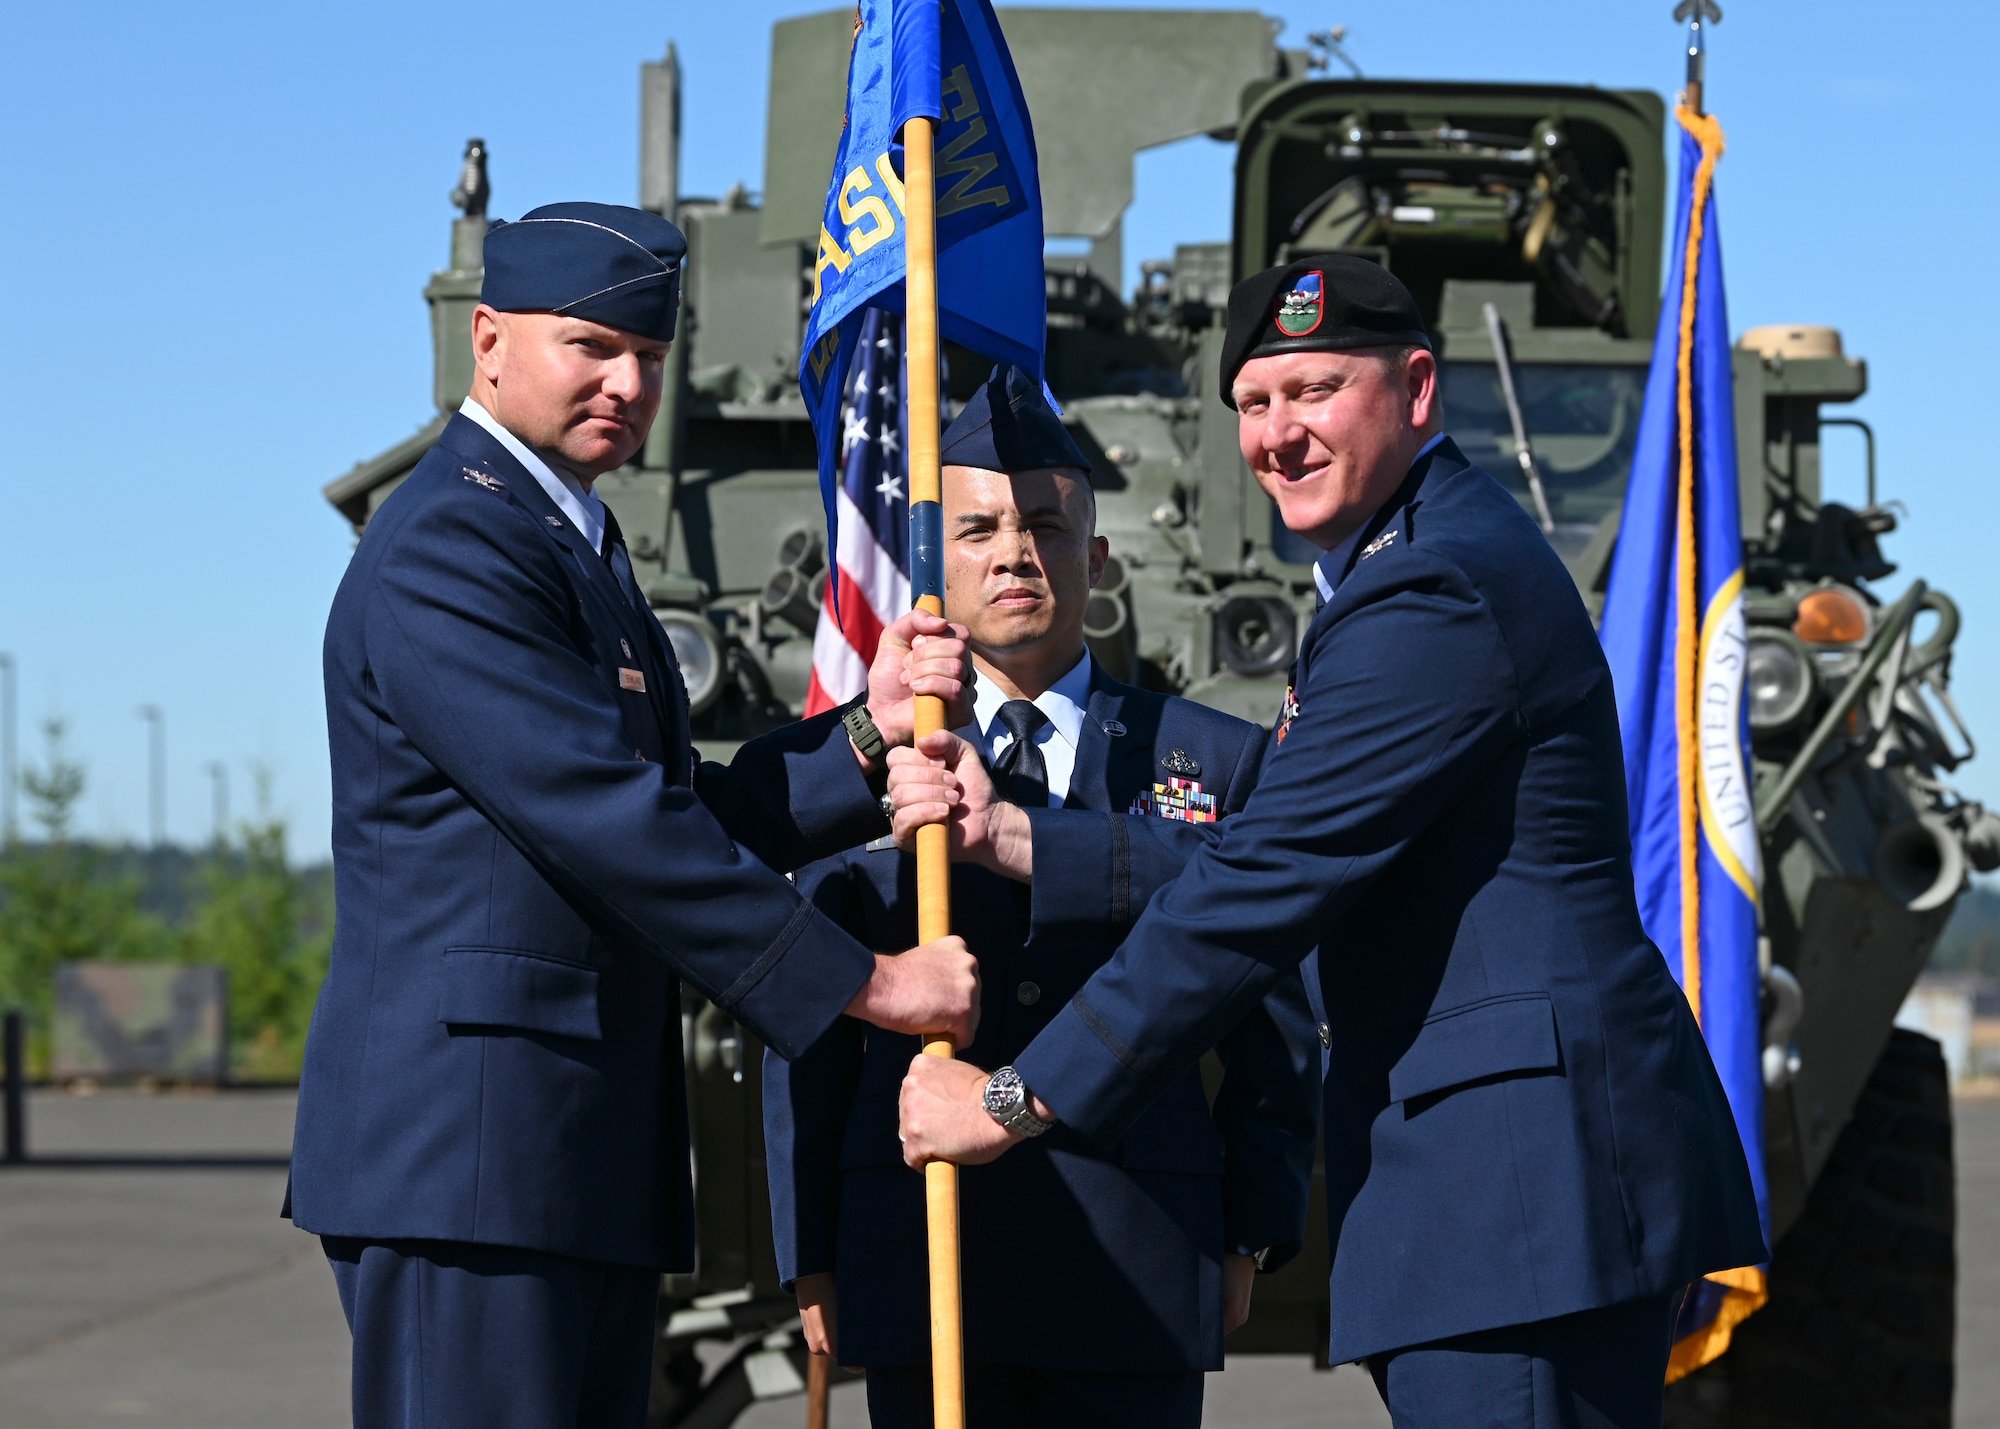 U.S. Air Force Col. John Blocher, right, commander of the 1st Air Support Operations Group, assumes command from Col. David Berkland, commander of the 354th Fighter Wing, during a change of command ceremony at Joint Base Lewis-McChord, Washington, August 15, 2022. The 1st ASOG provides an Air Support Operations Center, Tactical Air Control Parties and Battlefield Weather Teams to Army combat units at multiple echelons including United States Army Pacific, I Corps, and nine aviation, airborne, infantry and Stryker brigade combat teams of the 2nd and 25th Infantry Divisions. (U.S. Air Force photo by Senior Airman Callie Norton)